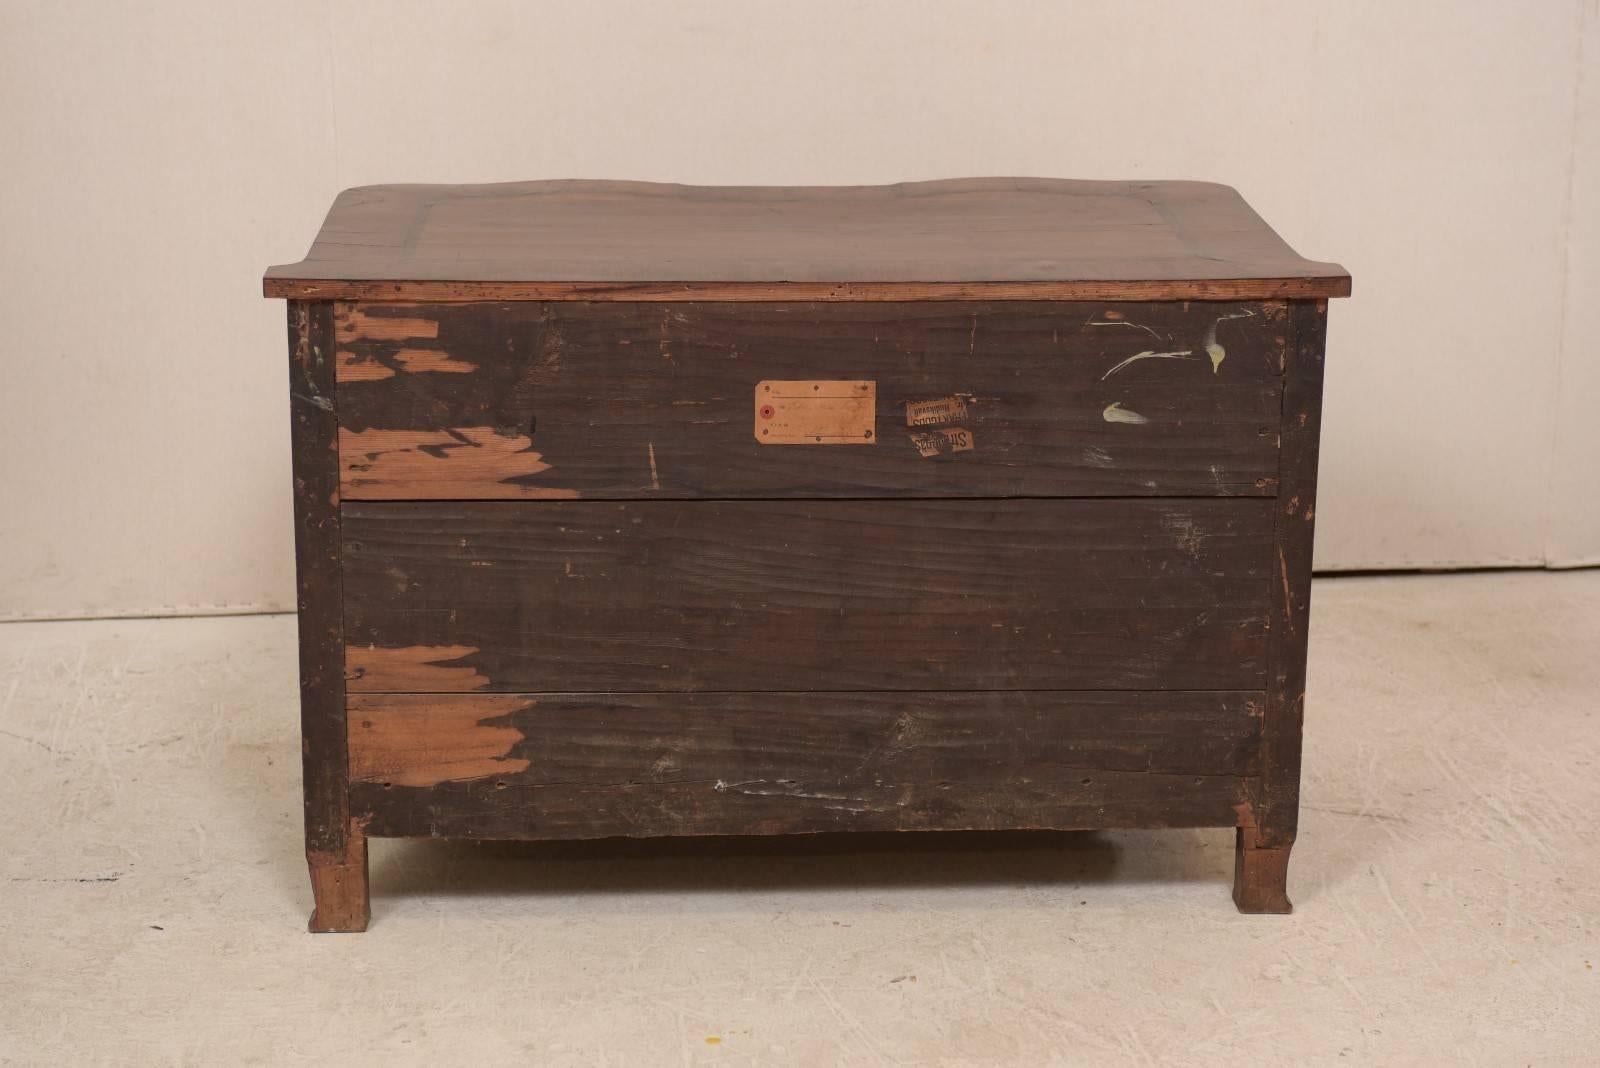 Period Baroque Swedish Wood Chest with Serpentine Front, circa 1725 For Sale 6